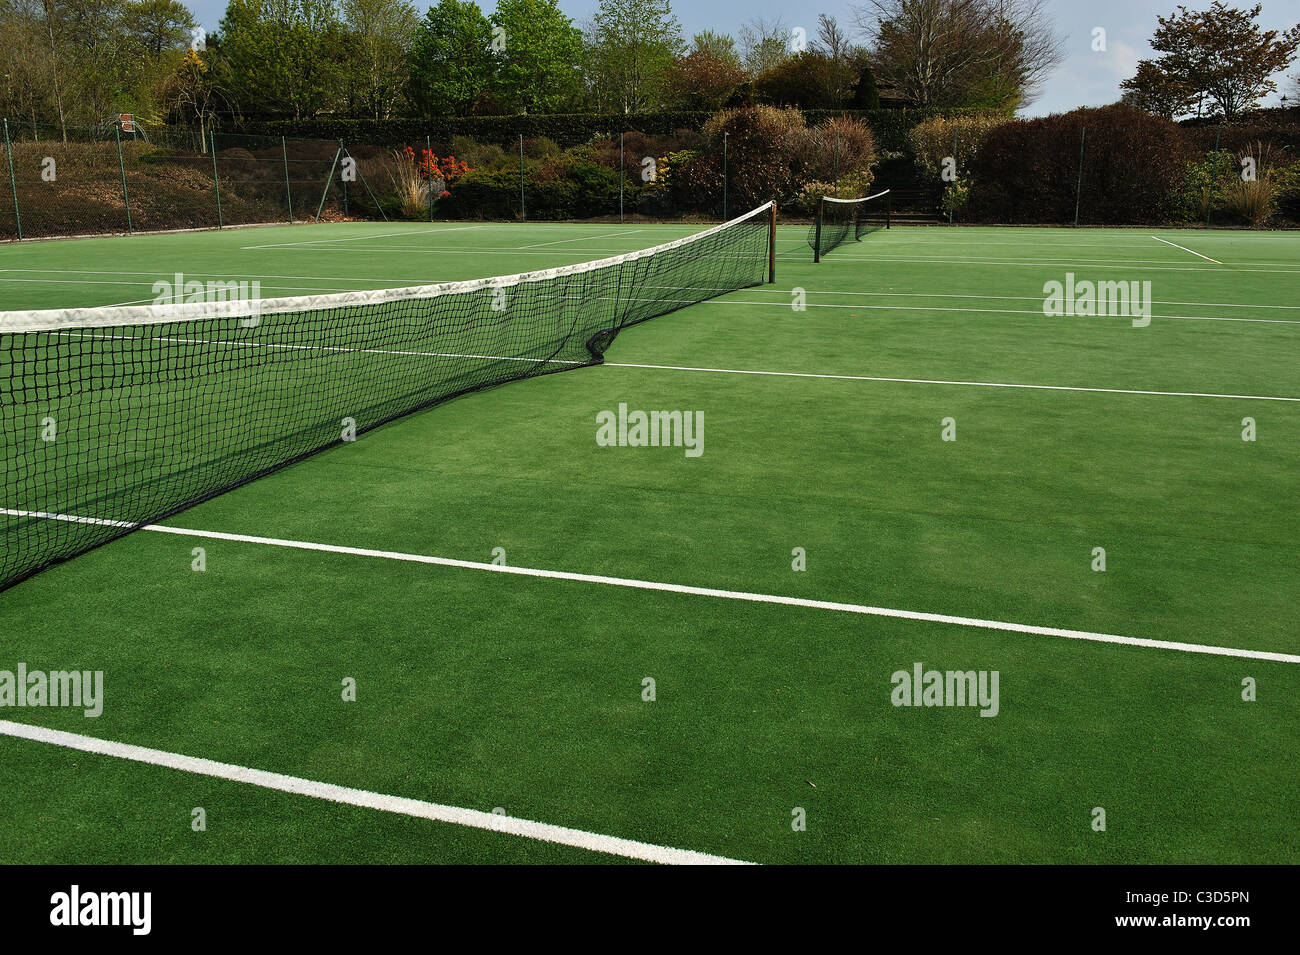 Green tennis court, ready for the next game Stock Photo